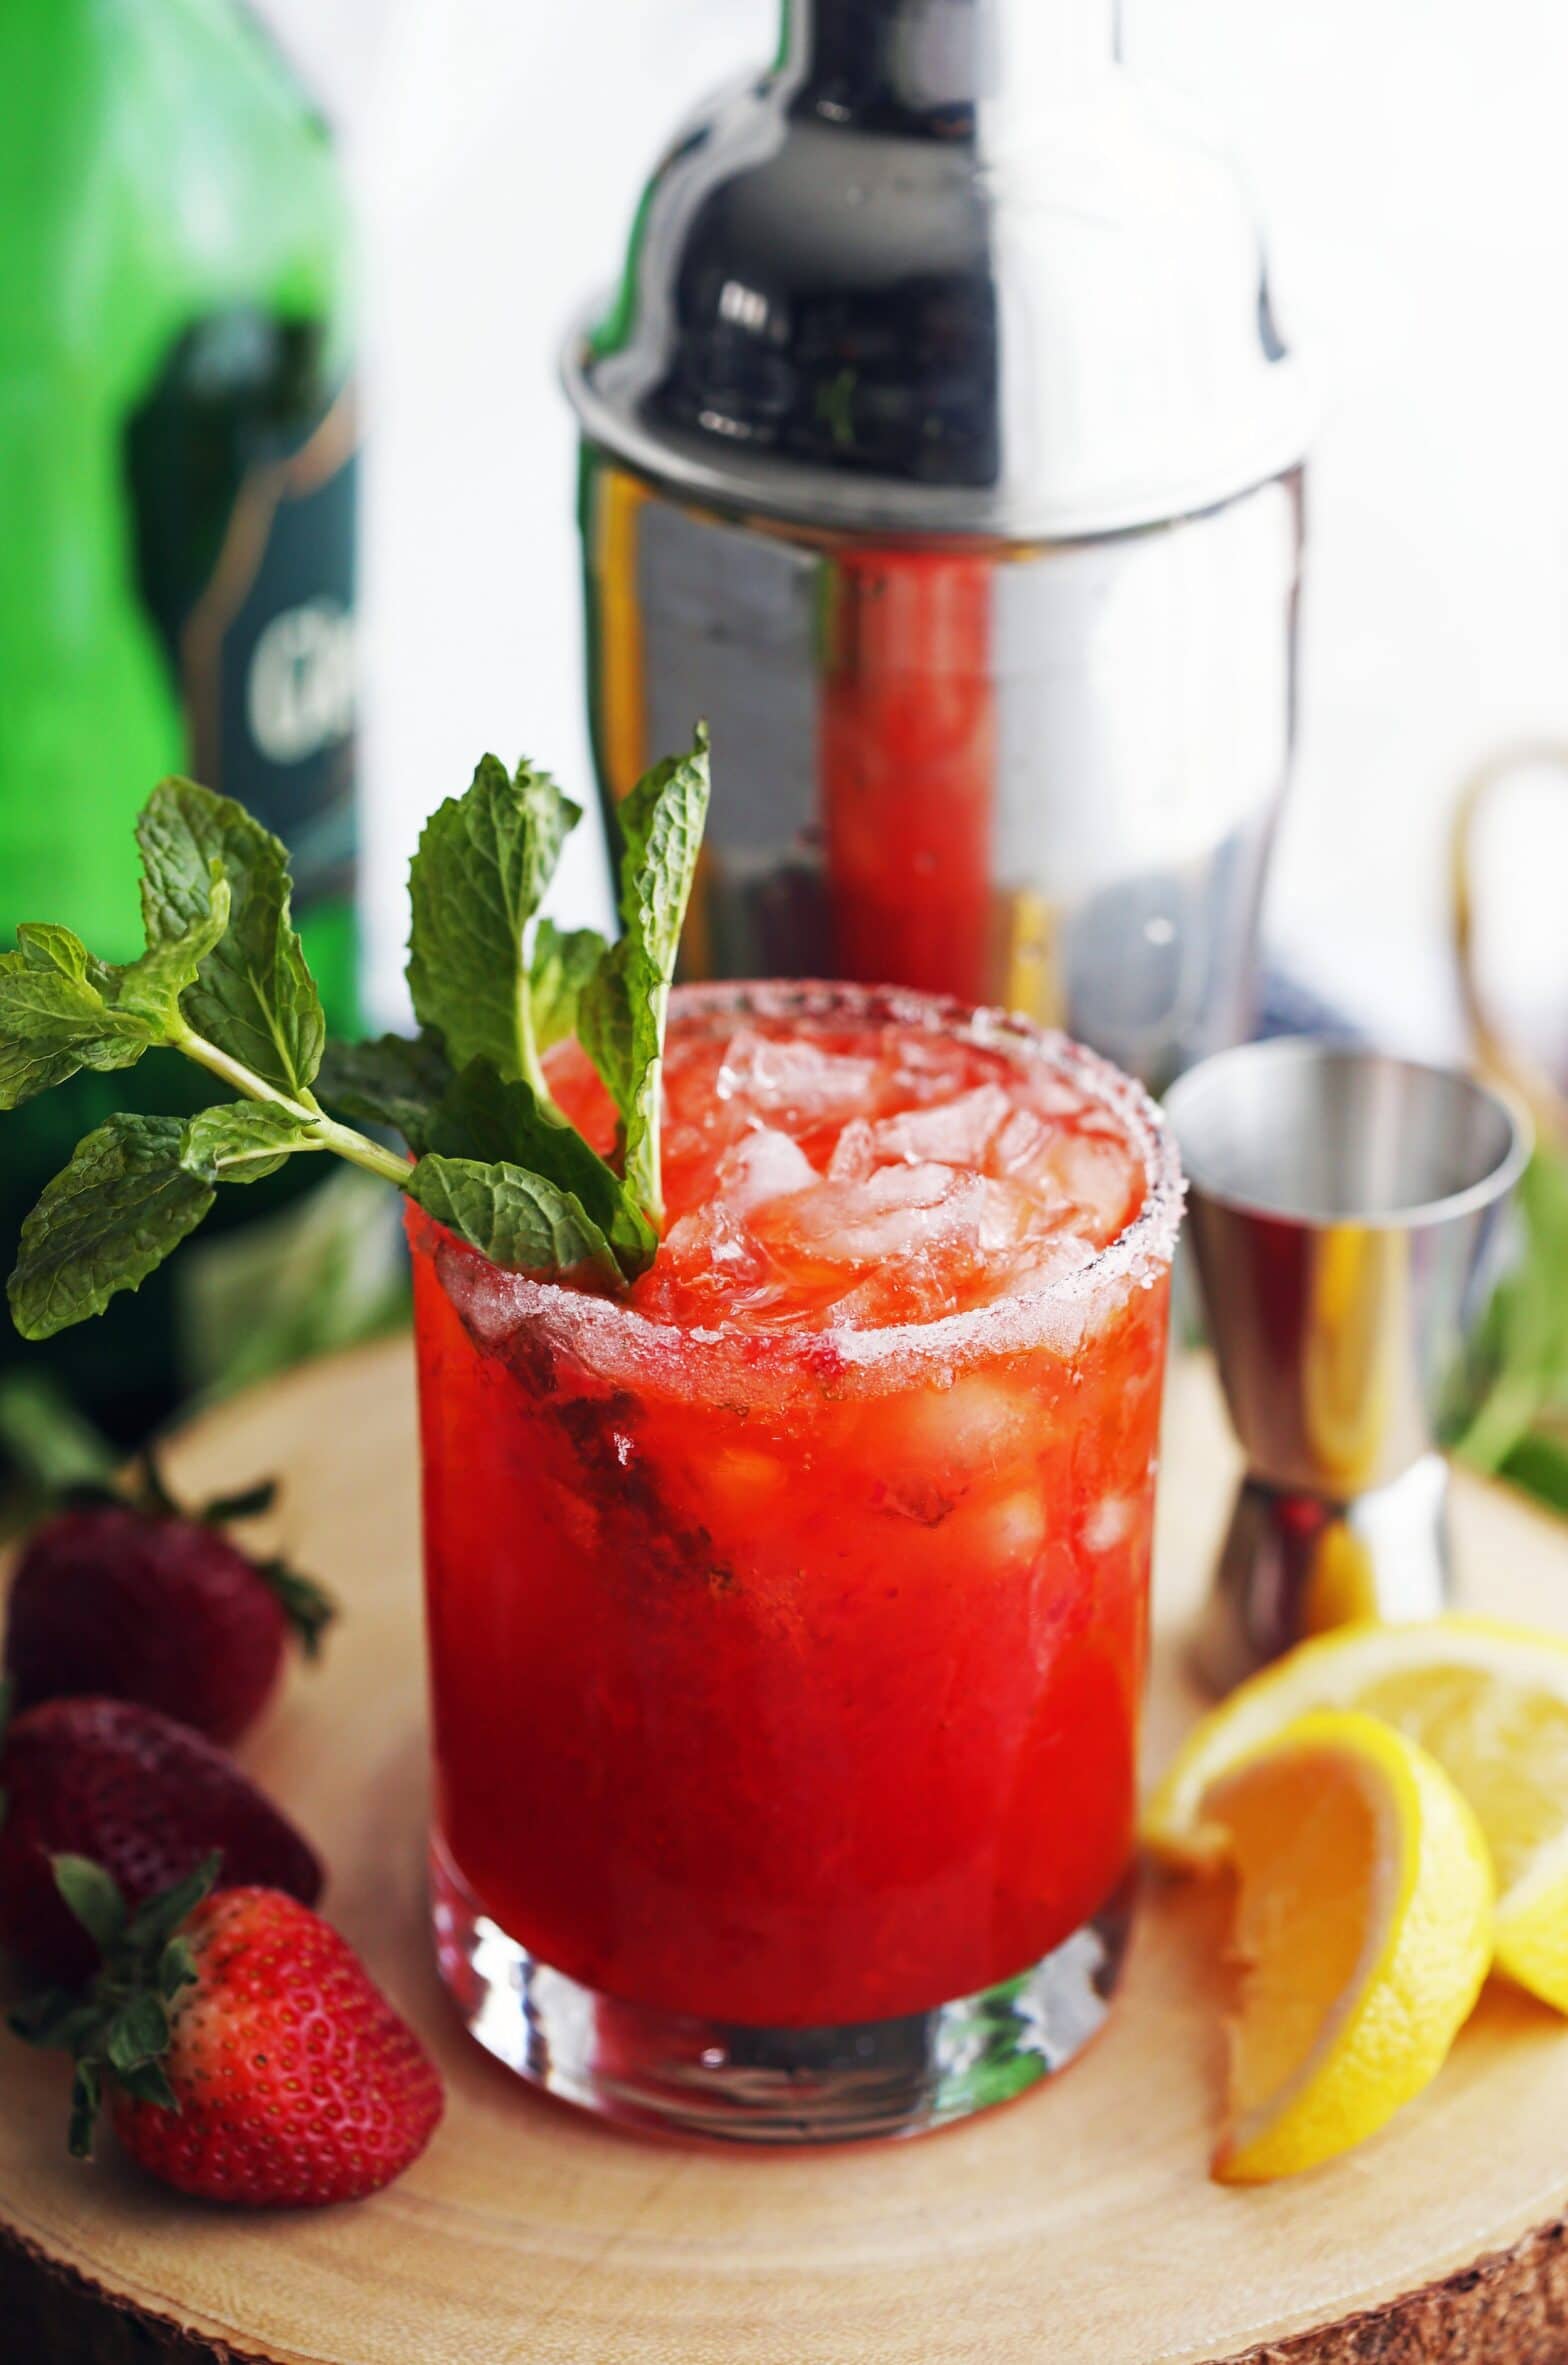 Mint Strawberry Whisky Smash Cocktail - Yay! For Food